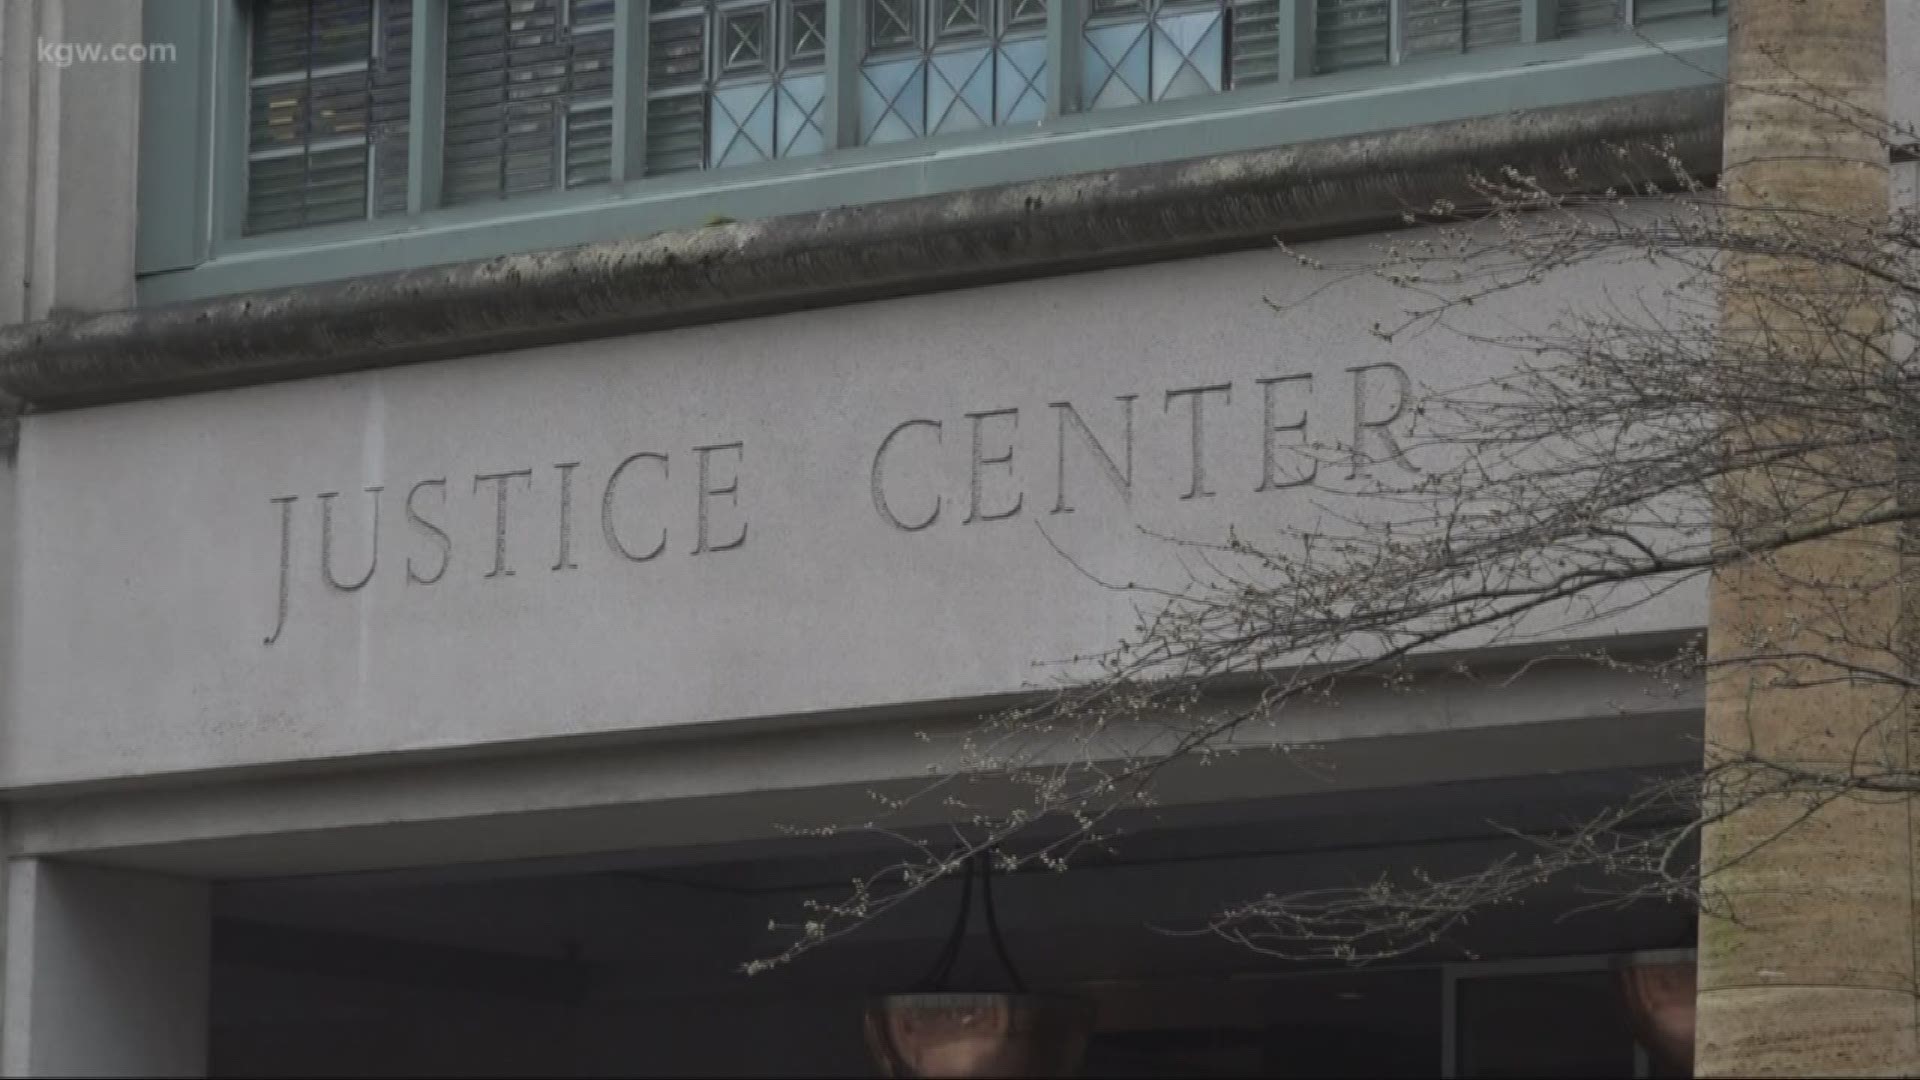 Breaking the cycle. Lindsay Nadrich reports on a new grant to help Multnomah County decrease the number of repeat offenders.